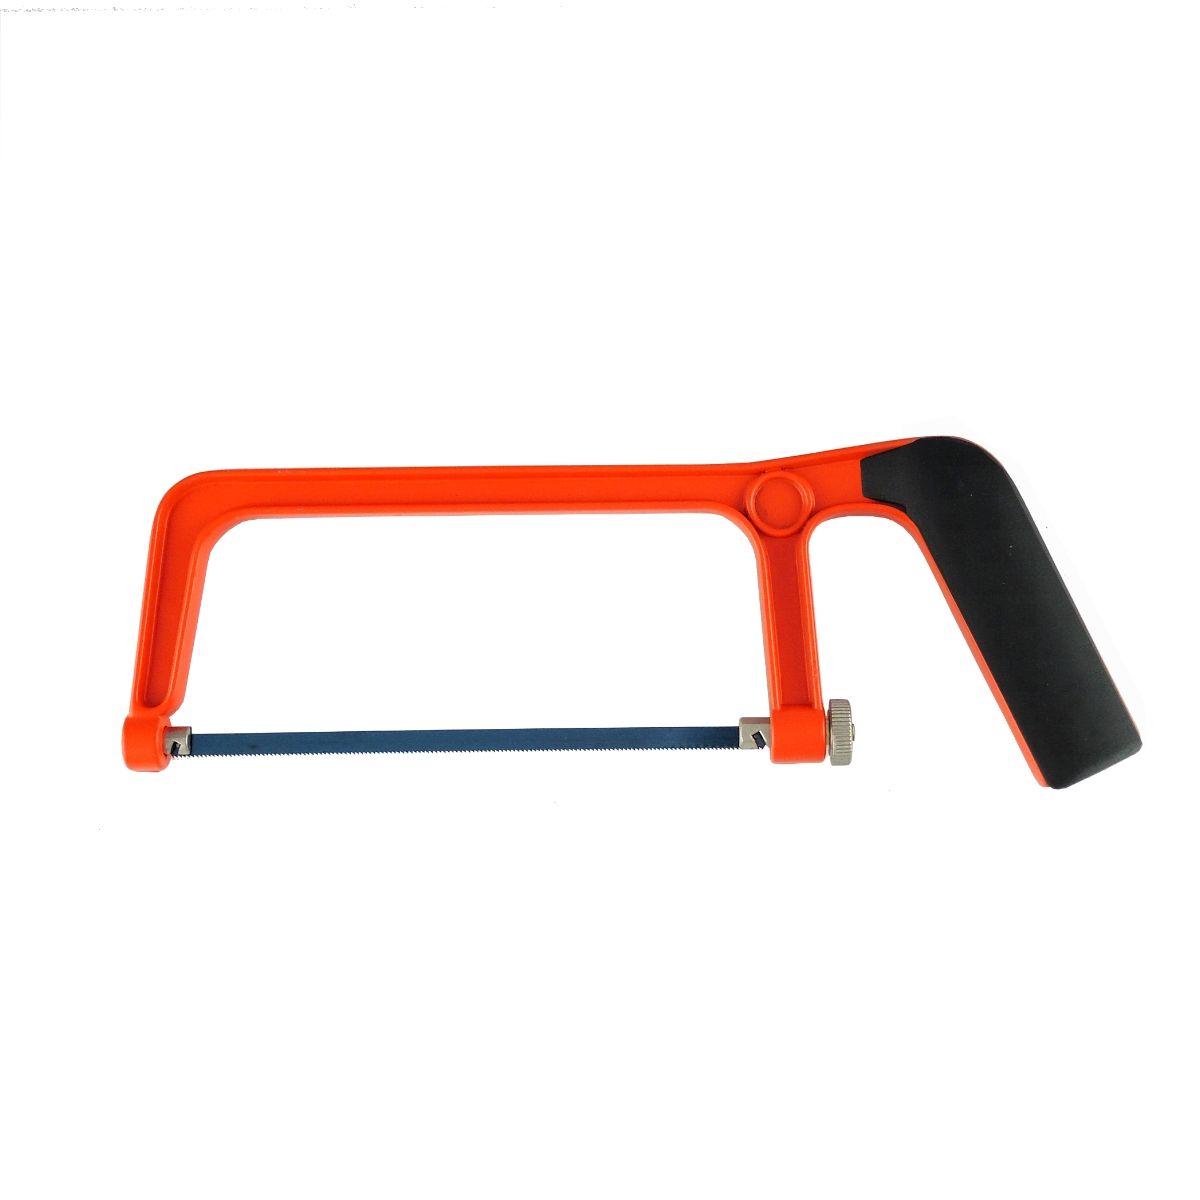 Coping Saw and Saw Blades Heat Treated Steel Blades Ready for Durability  Red Wood Handle Hand Saw 